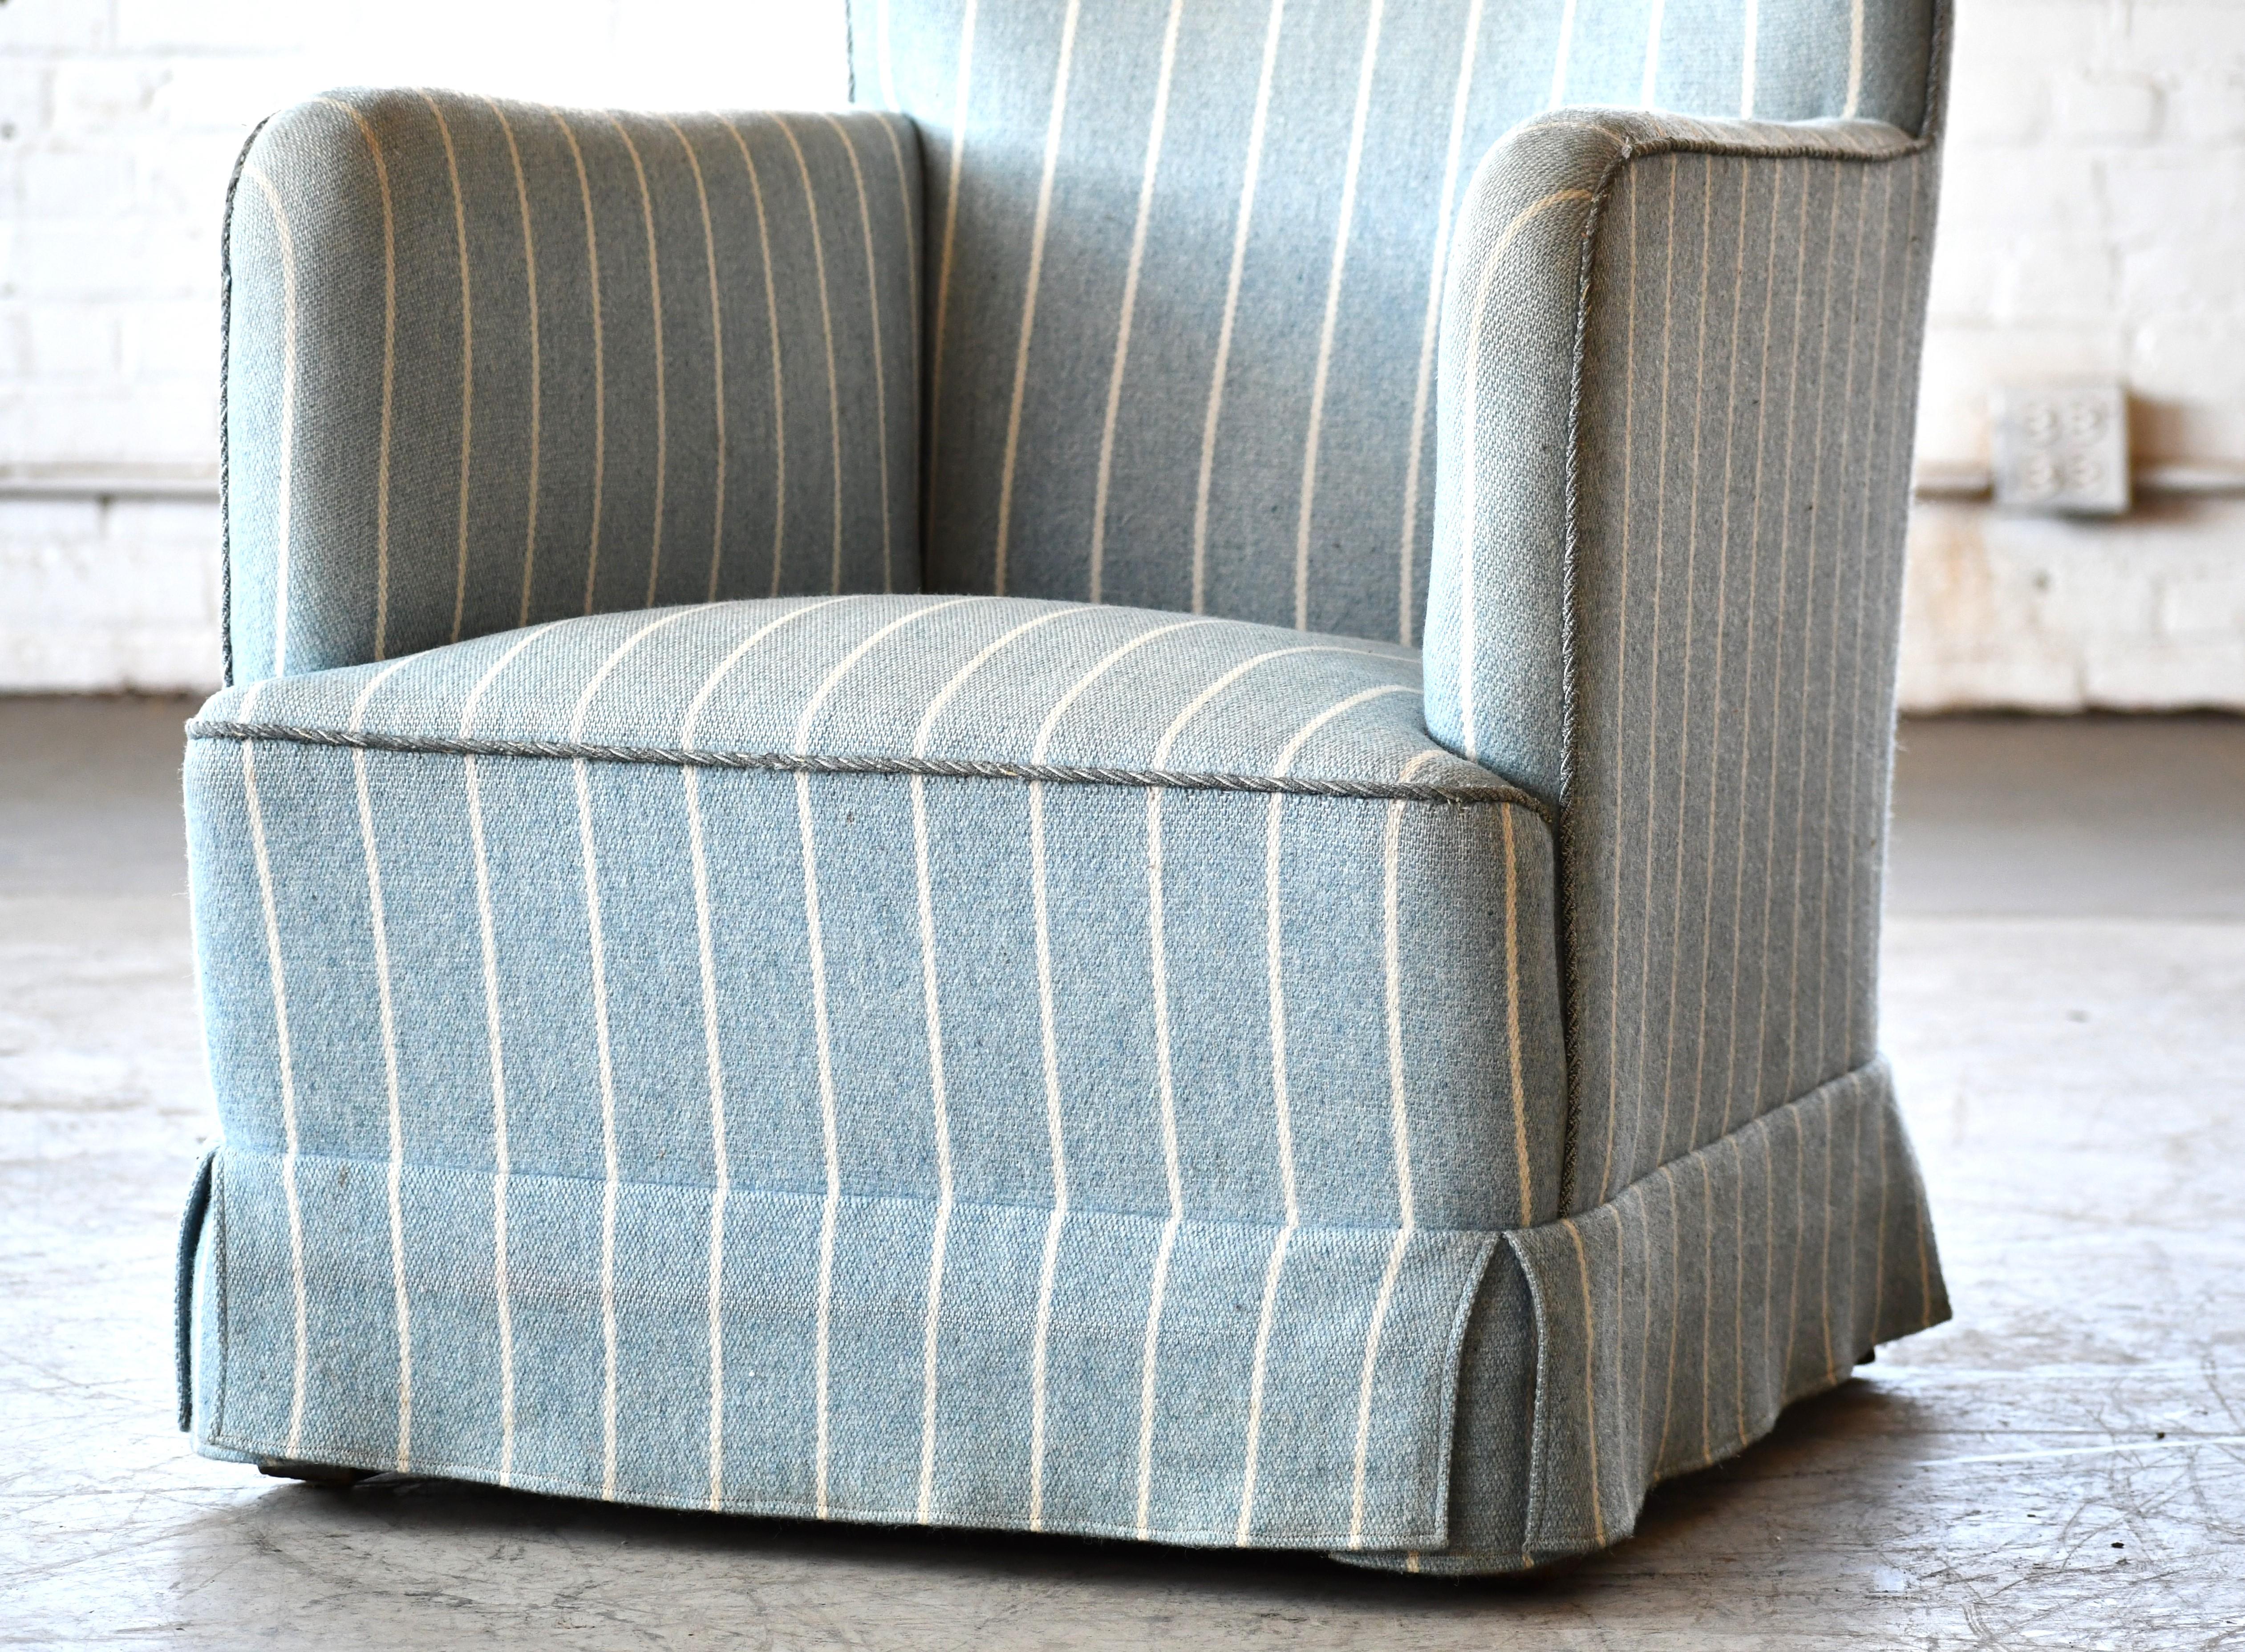 Mid-20th Century Danish Peter Hvidt Style Lounge Chair in Light Blue Striped Wool For Sale